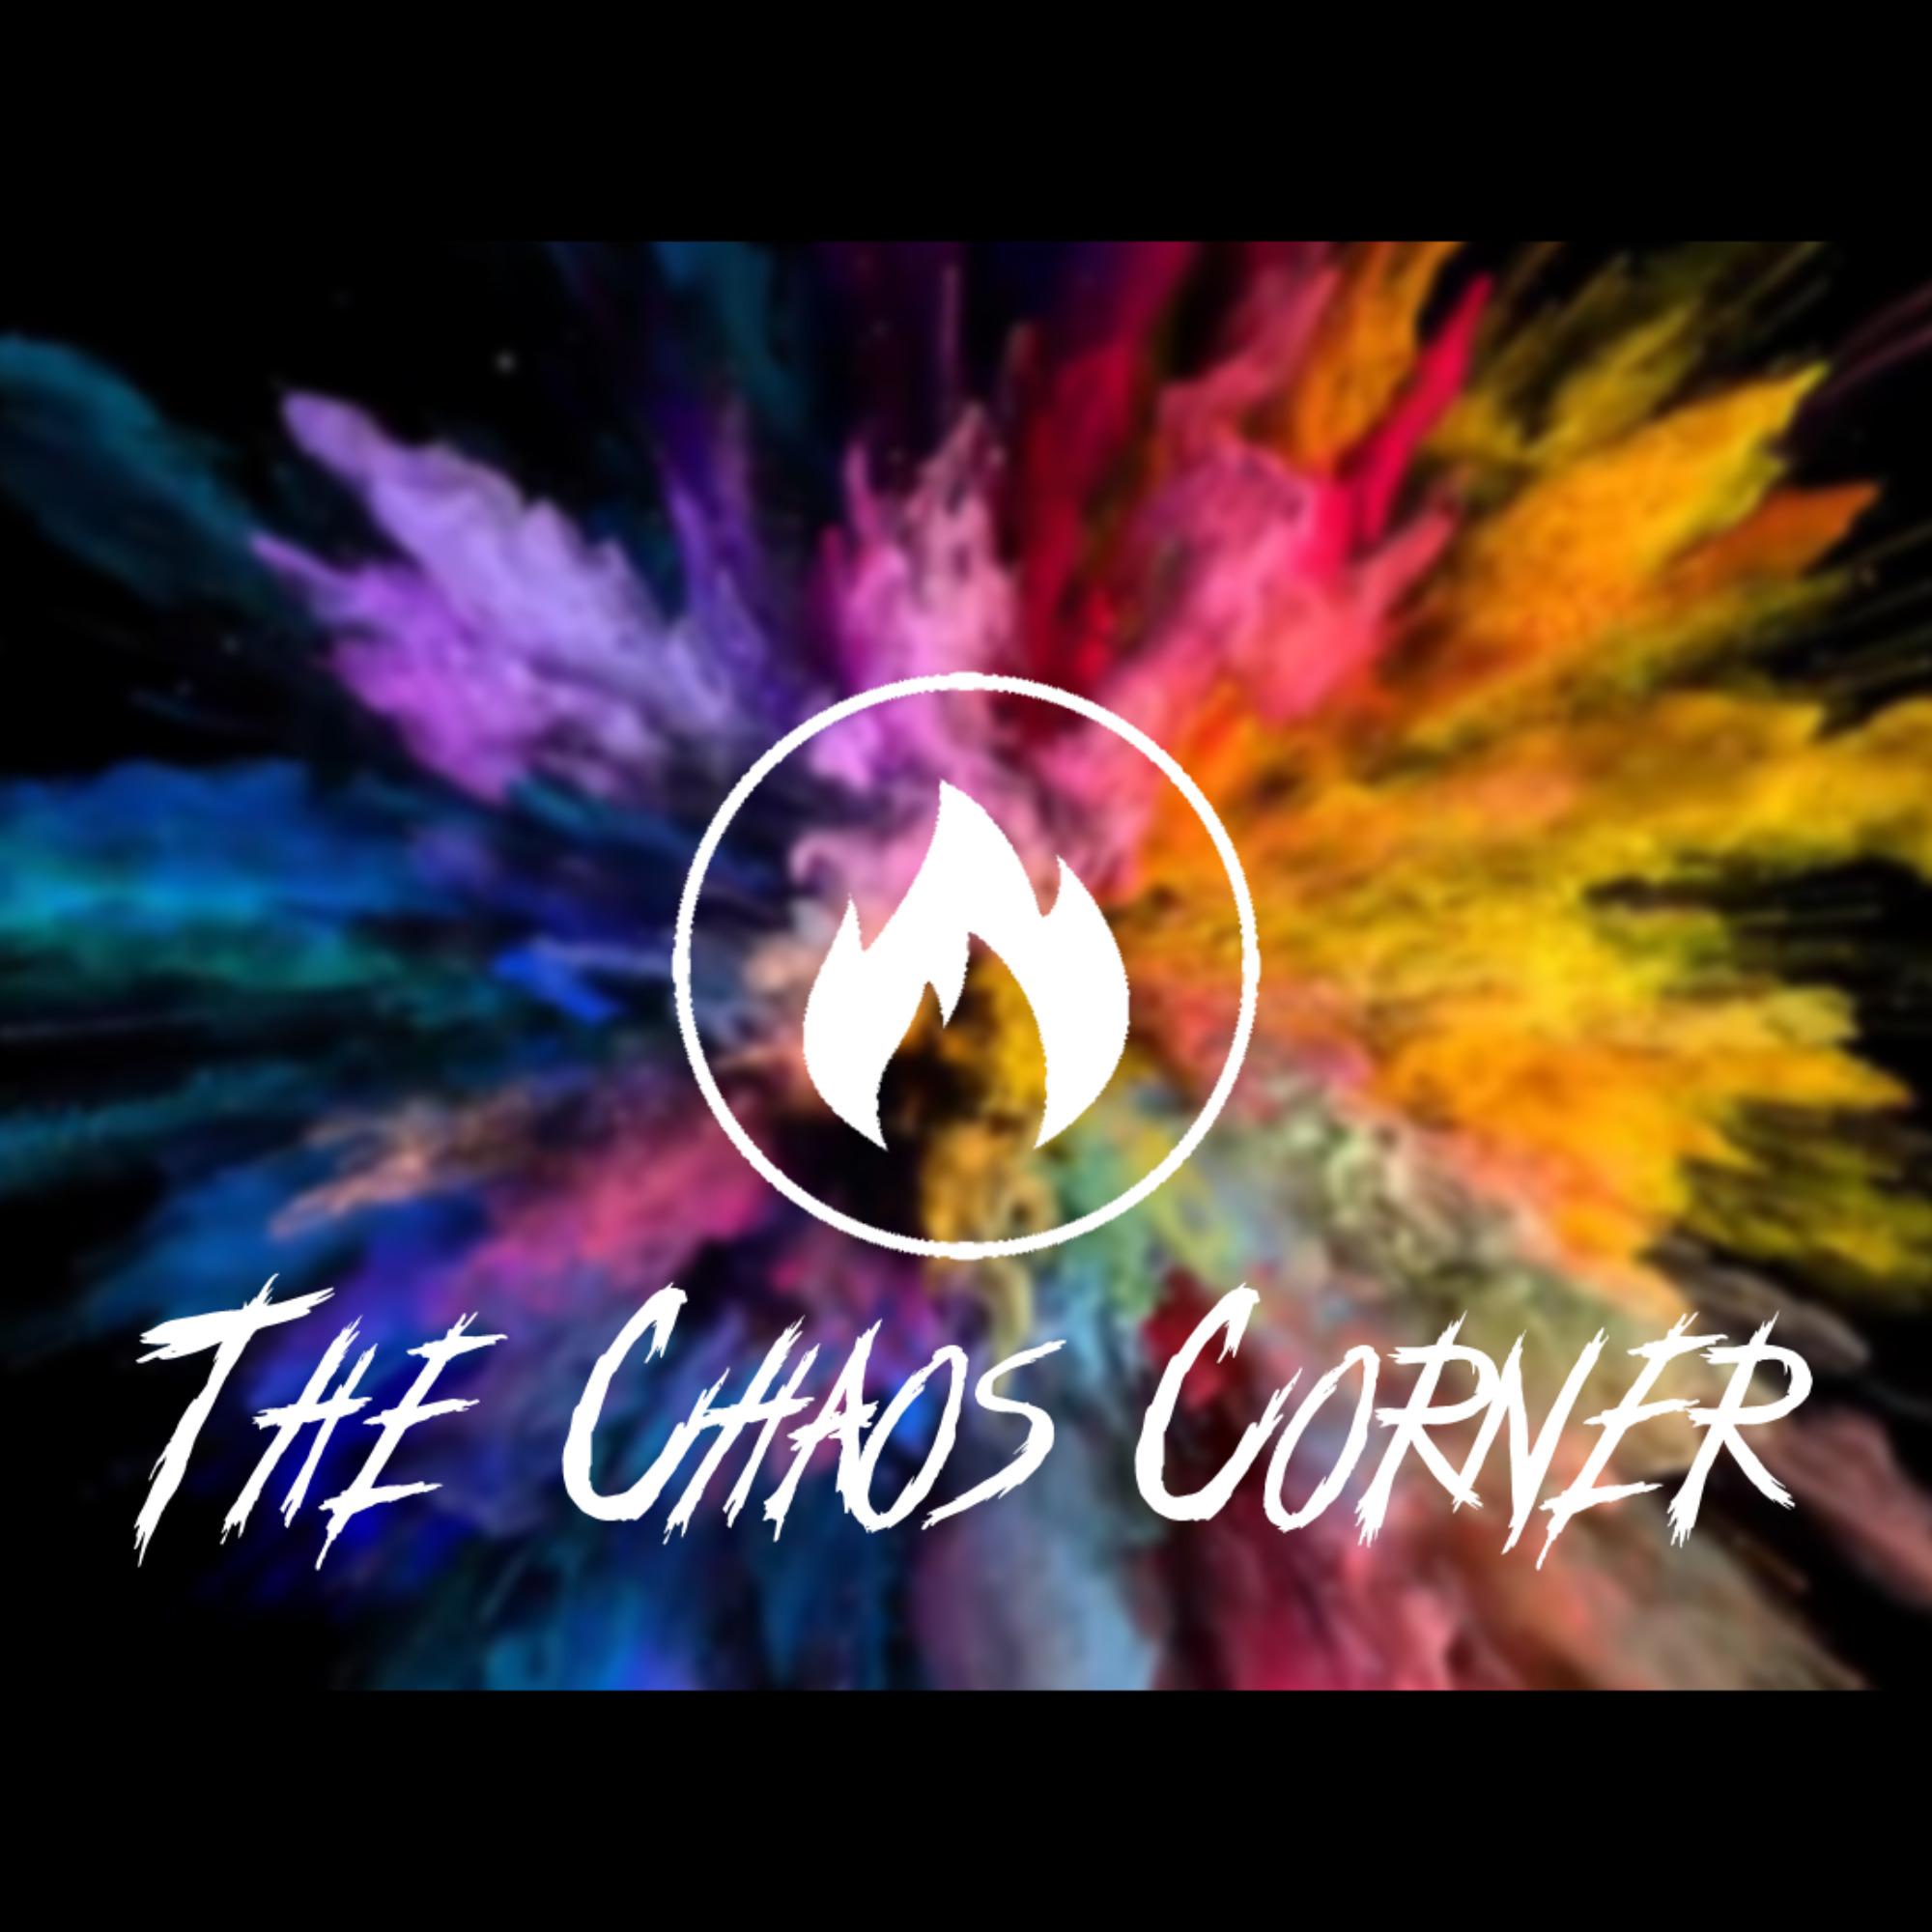 The Chaos Corner Podcast